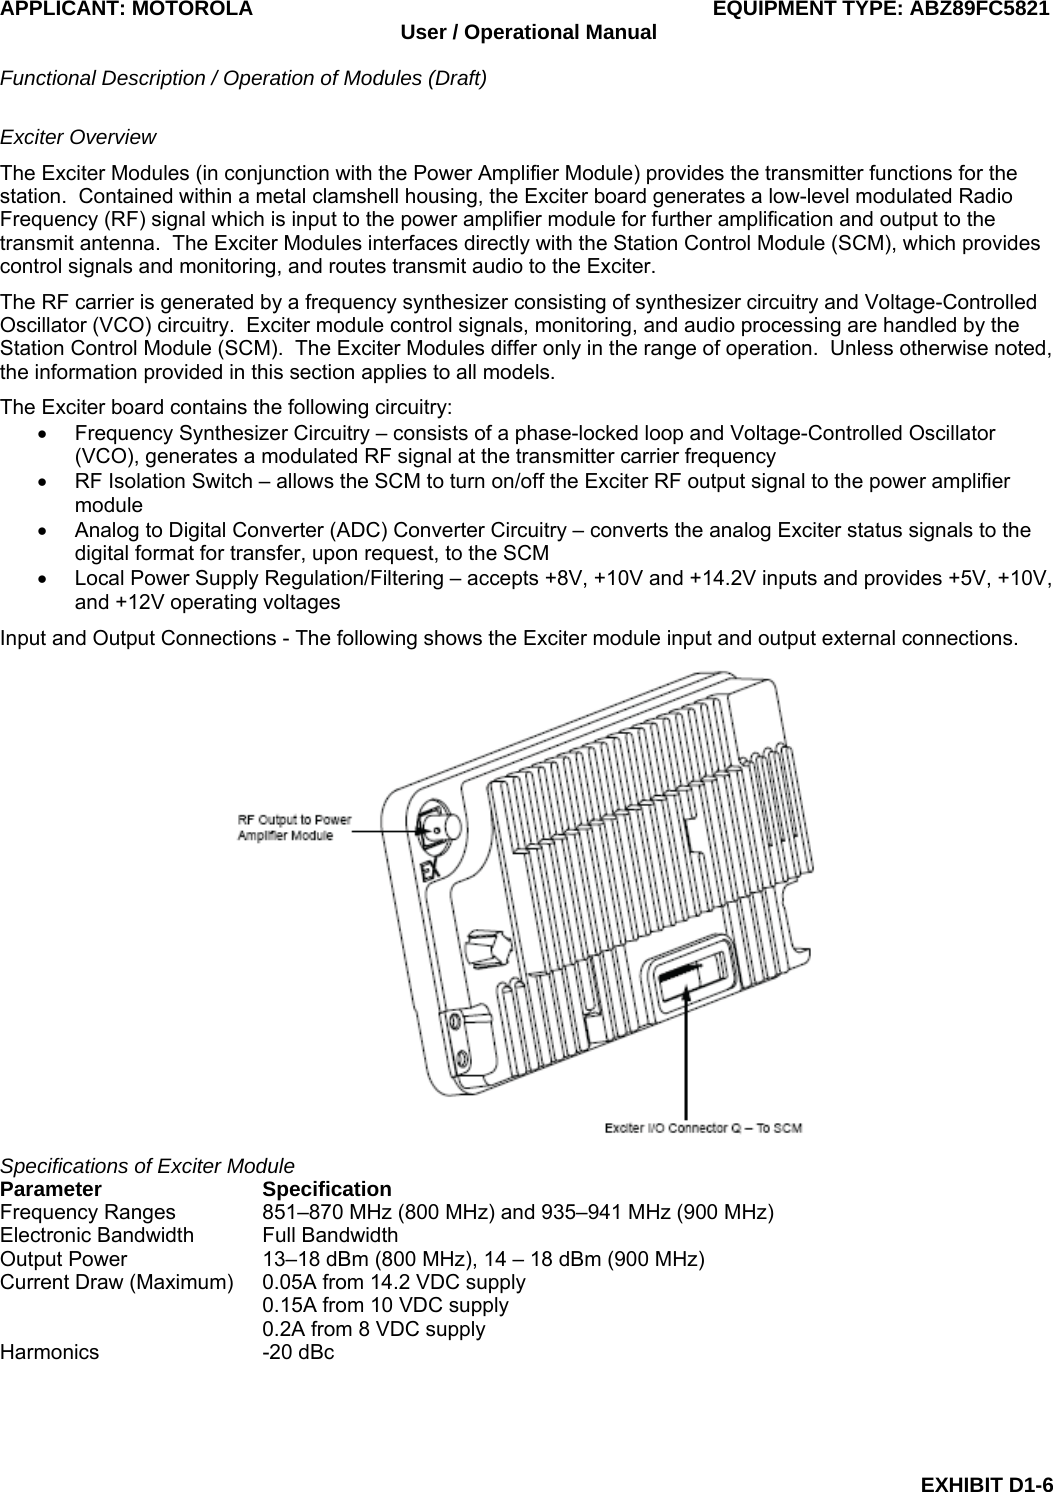 APPLICANT: MOTOROLA  EQUIPMENT TYPE: ABZ89FC5821 User / Operational Manual  Functional Description / Operation of Modules (Draft)  EXHIBIT D1-6 Exciter Overview The Exciter Modules (in conjunction with the Power Amplifier Module) provides the transmitter functions for the station.  Contained within a metal clamshell housing, the Exciter board generates a low-level modulated Radio Frequency (RF) signal which is input to the power amplifier module for further amplification and output to the transmit antenna.  The Exciter Modules interfaces directly with the Station Control Module (SCM), which provides control signals and monitoring, and routes transmit audio to the Exciter. The RF carrier is generated by a frequency synthesizer consisting of synthesizer circuitry and Voltage-Controlled Oscillator (VCO) circuitry.  Exciter module control signals, monitoring, and audio processing are handled by the Station Control Module (SCM).  The Exciter Modules differ only in the range of operation.  Unless otherwise noted, the information provided in this section applies to all models. The Exciter board contains the following circuitry: •  Frequency Synthesizer Circuitry – consists of a phase-locked loop and Voltage-Controlled Oscillator (VCO), generates a modulated RF signal at the transmitter carrier frequency •  RF Isolation Switch – allows the SCM to turn on/off the Exciter RF output signal to the power amplifier module •  Analog to Digital Converter (ADC) Converter Circuitry – converts the analog Exciter status signals to the digital format for transfer, upon request, to the SCM •  Local Power Supply Regulation/Filtering – accepts +8V, +10V and +14.2V inputs and provides +5V, +10V, and +12V operating voltages Input and Output Connections - The following shows the Exciter module input and output external connections.  Specifications of Exciter Module Parameter Specification Frequency Ranges  851–870 MHz (800 MHz) and 935–941 MHz (900 MHz) Electronic Bandwidth  Full Bandwidth Output Power  13–18 dBm (800 MHz), 14 – 18 dBm (900 MHz) Current Draw (Maximum)  0.05A from 14.2 VDC supply   0.15A from 10 VDC supply   0.2A from 8 VDC supply Harmonics -20 dBc 